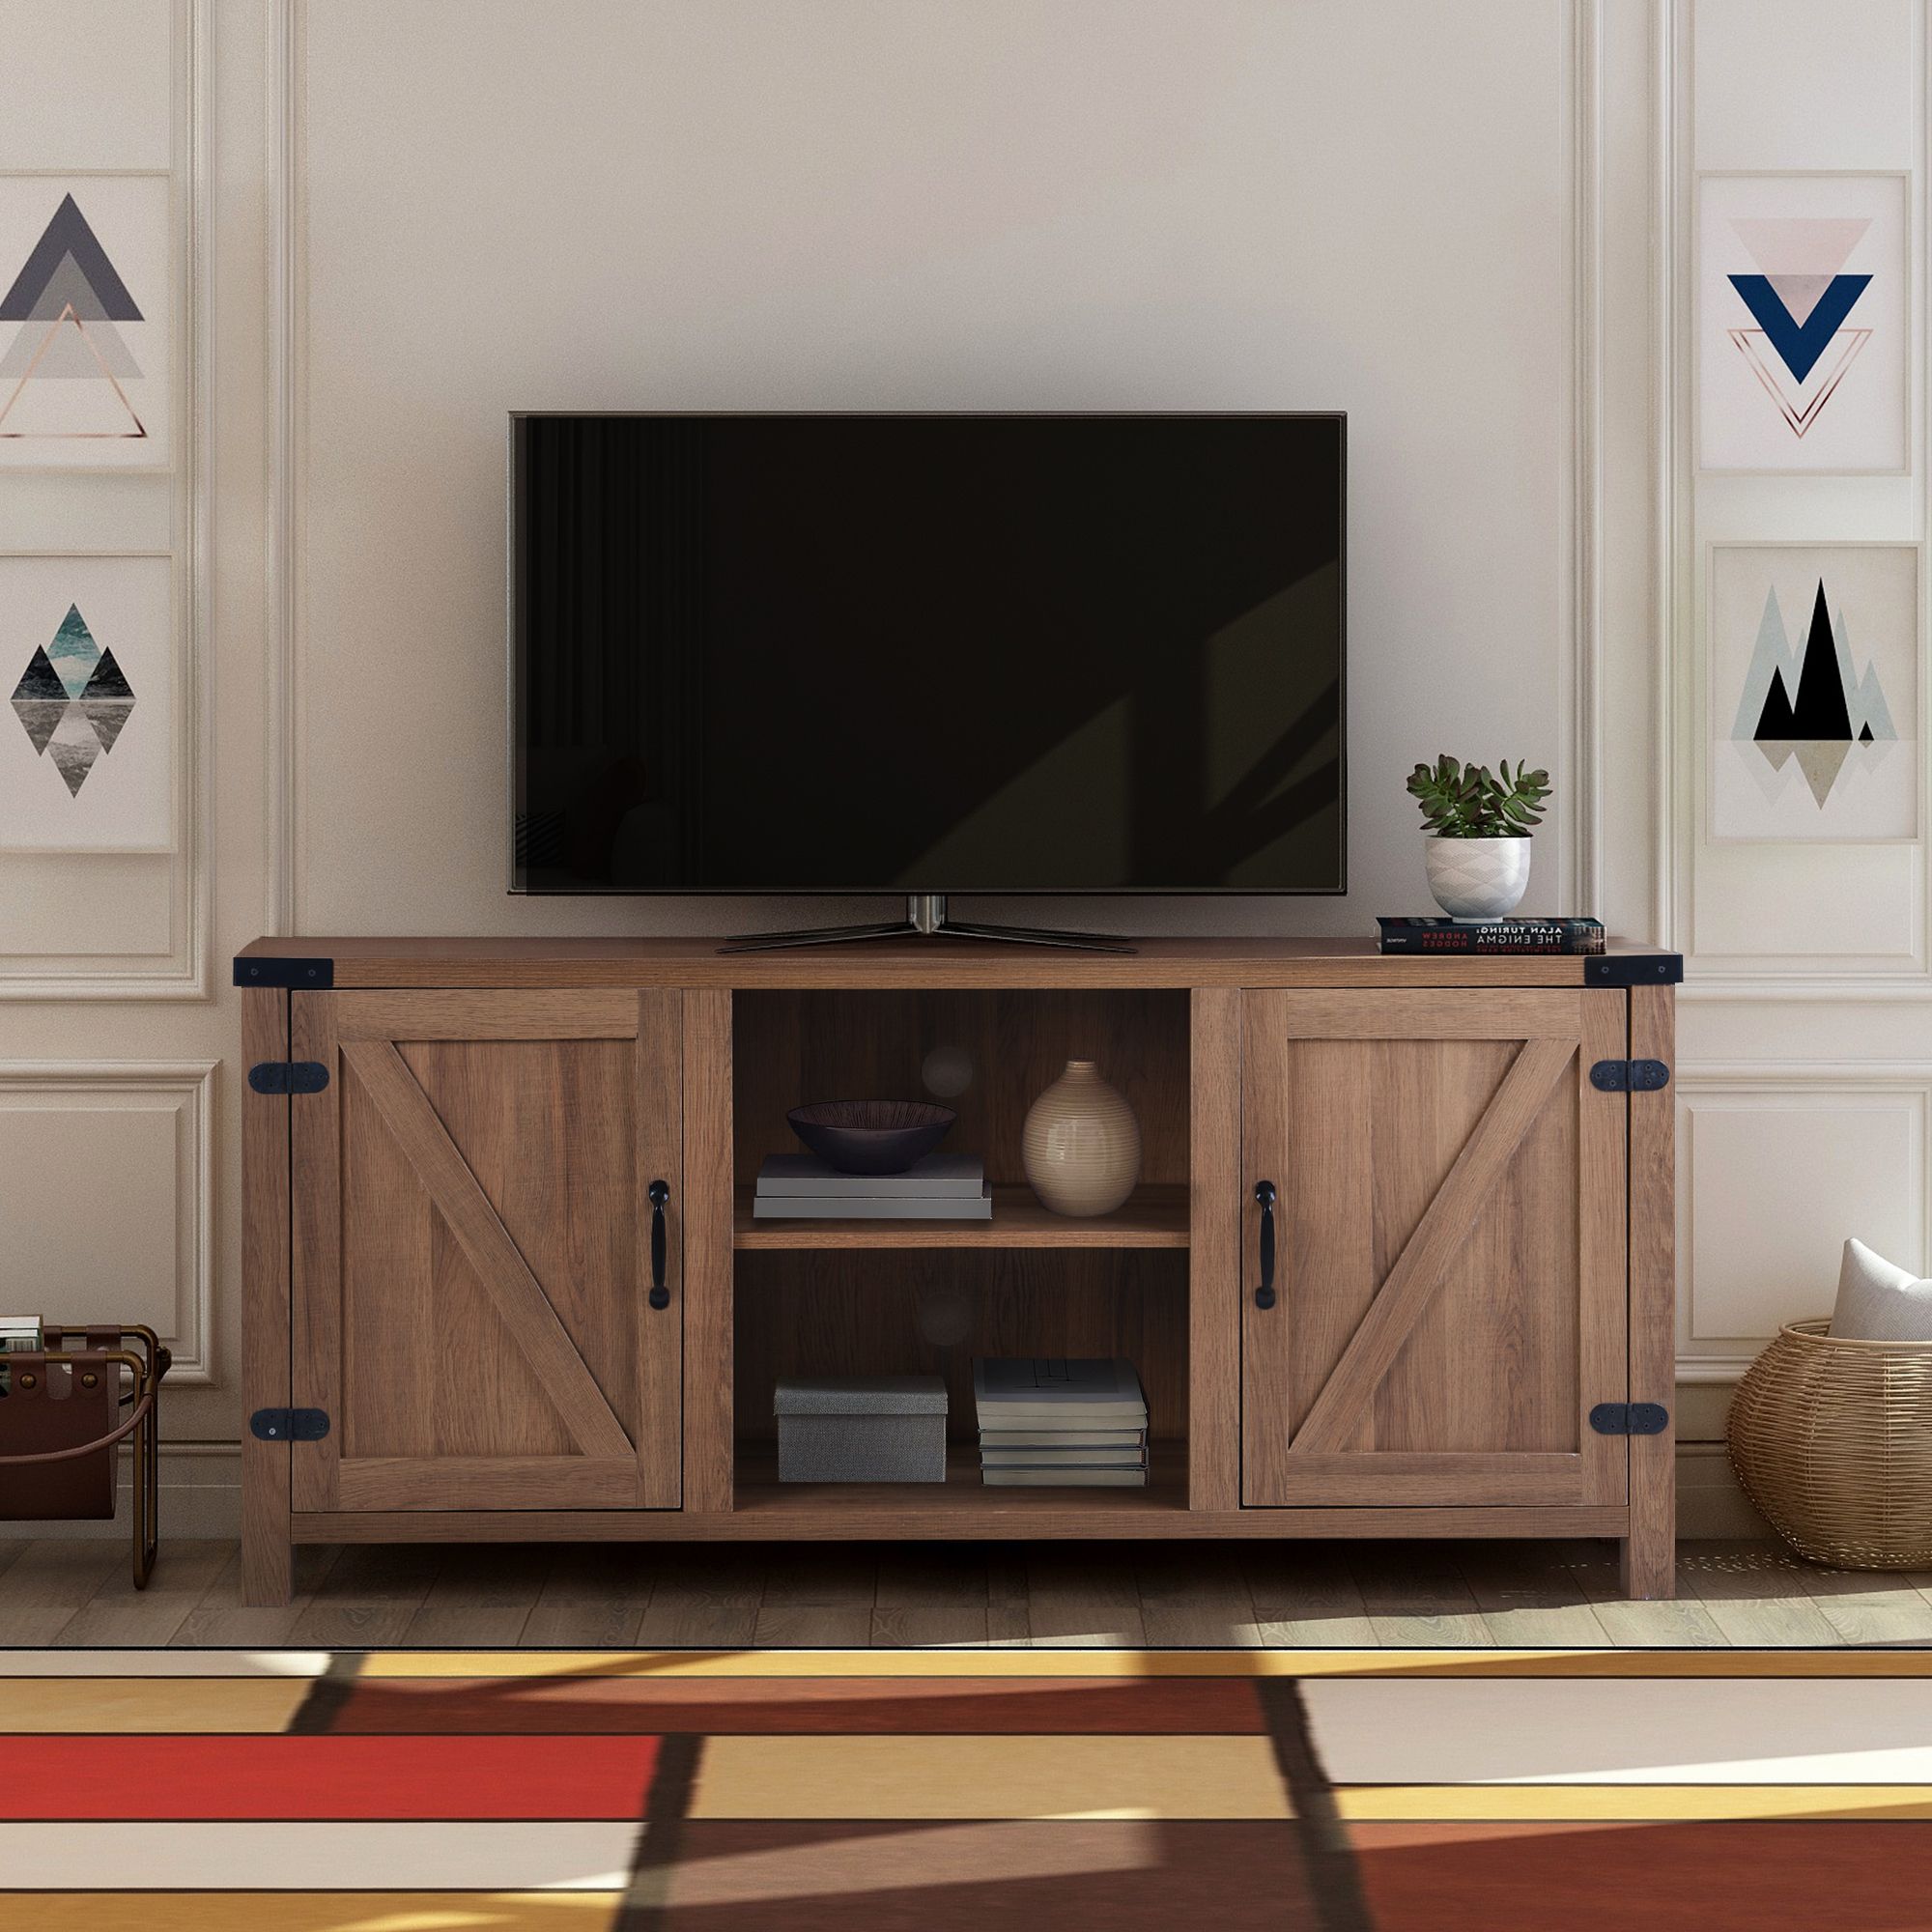 Kamari Tv Stands For Tvs Up To 58" Intended For 2018 Clearance! Modern Tv Stand Cabinet, Farmhouse Tv Stand For (View 3 of 25)